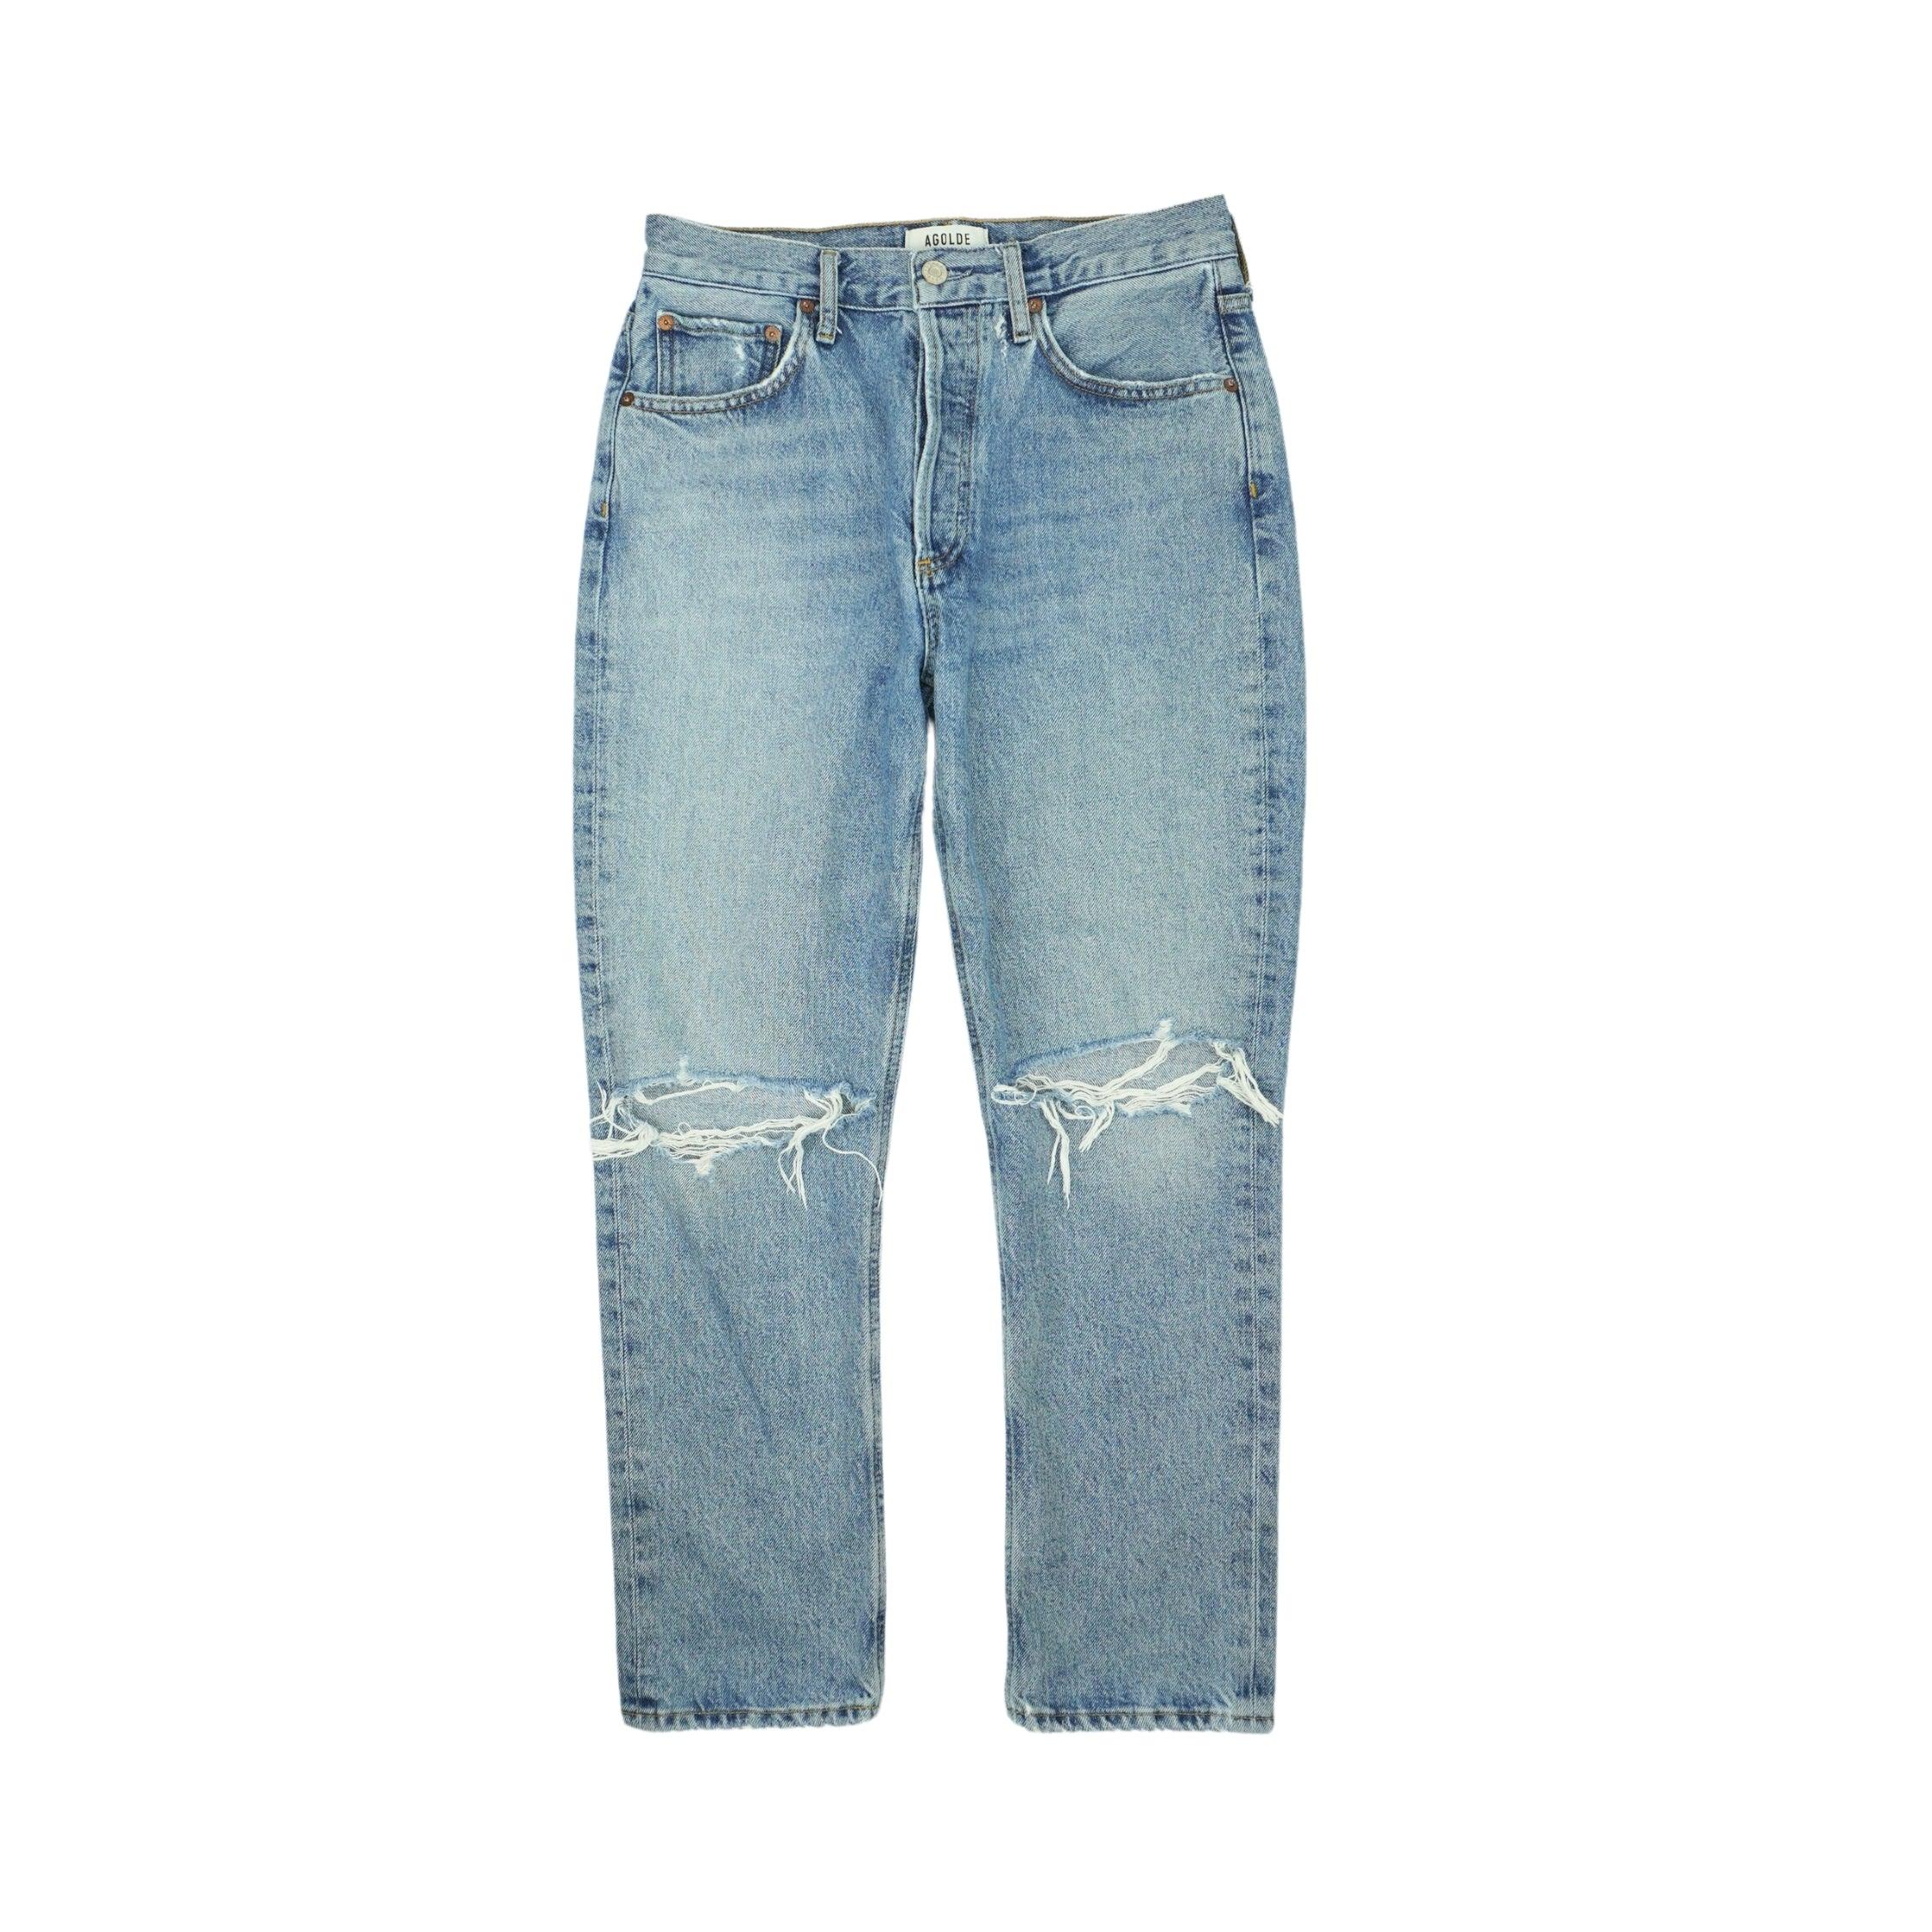 AGOLDE Jeans - Women's 27 - Fashionably Yours